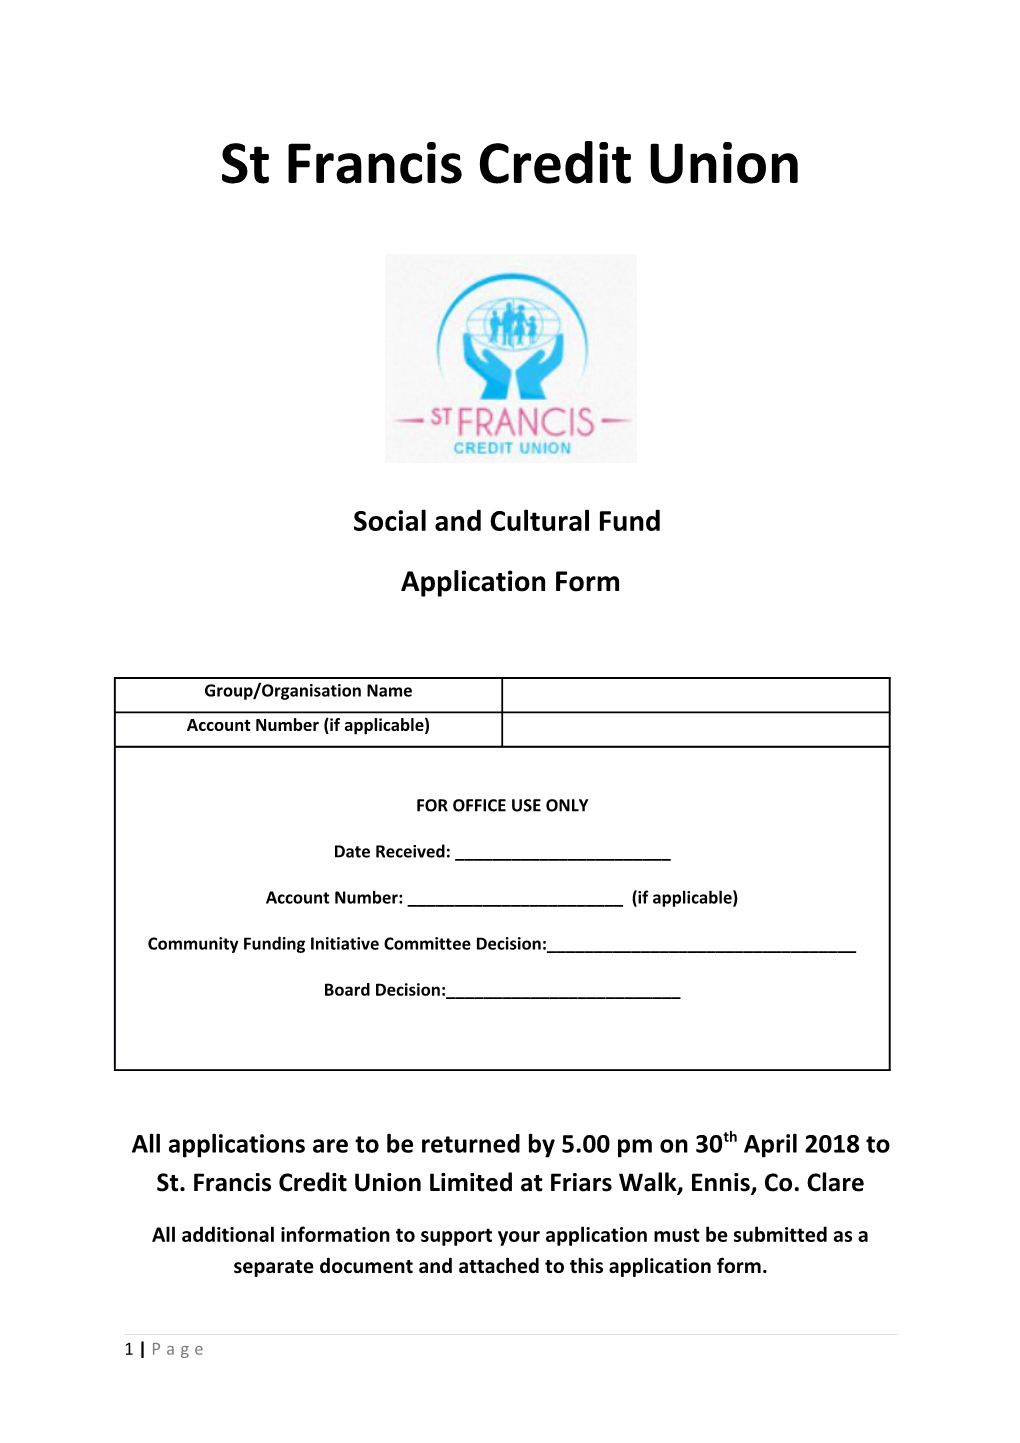 St. Francis CREDIT UNION LIMITED- SOCIAL and CULTURAL FUND APPLICATION FORM